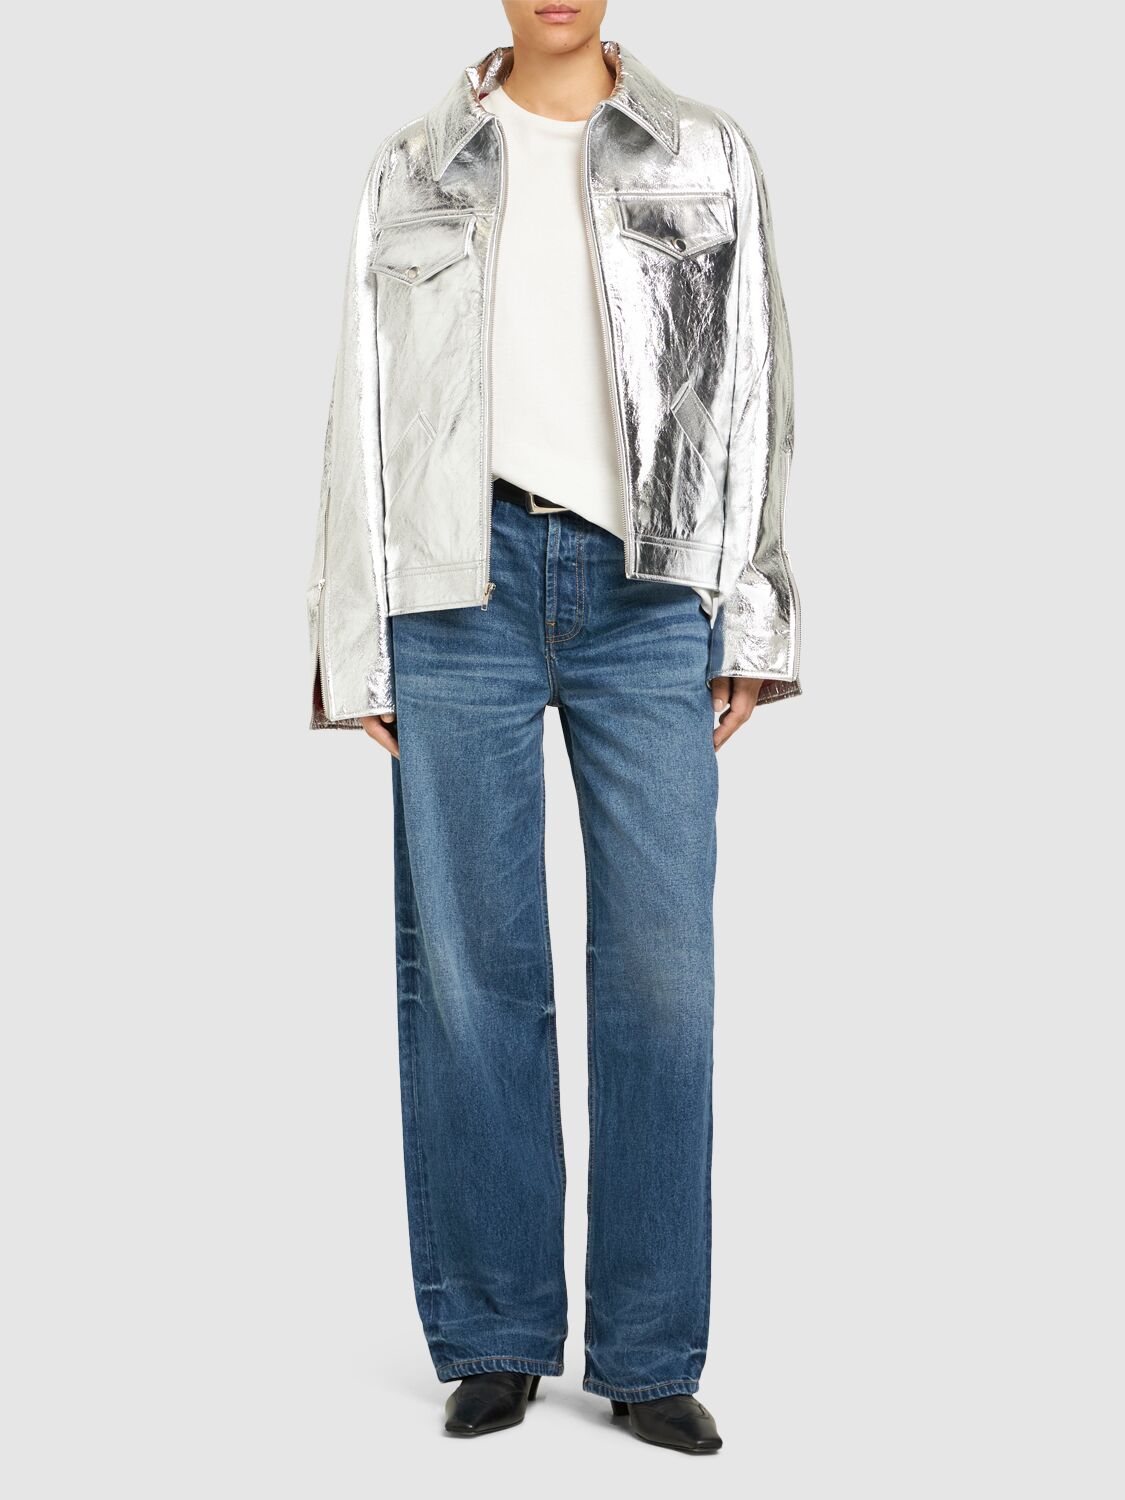 Shop Interior The Sterling Leather Jacket In Silver